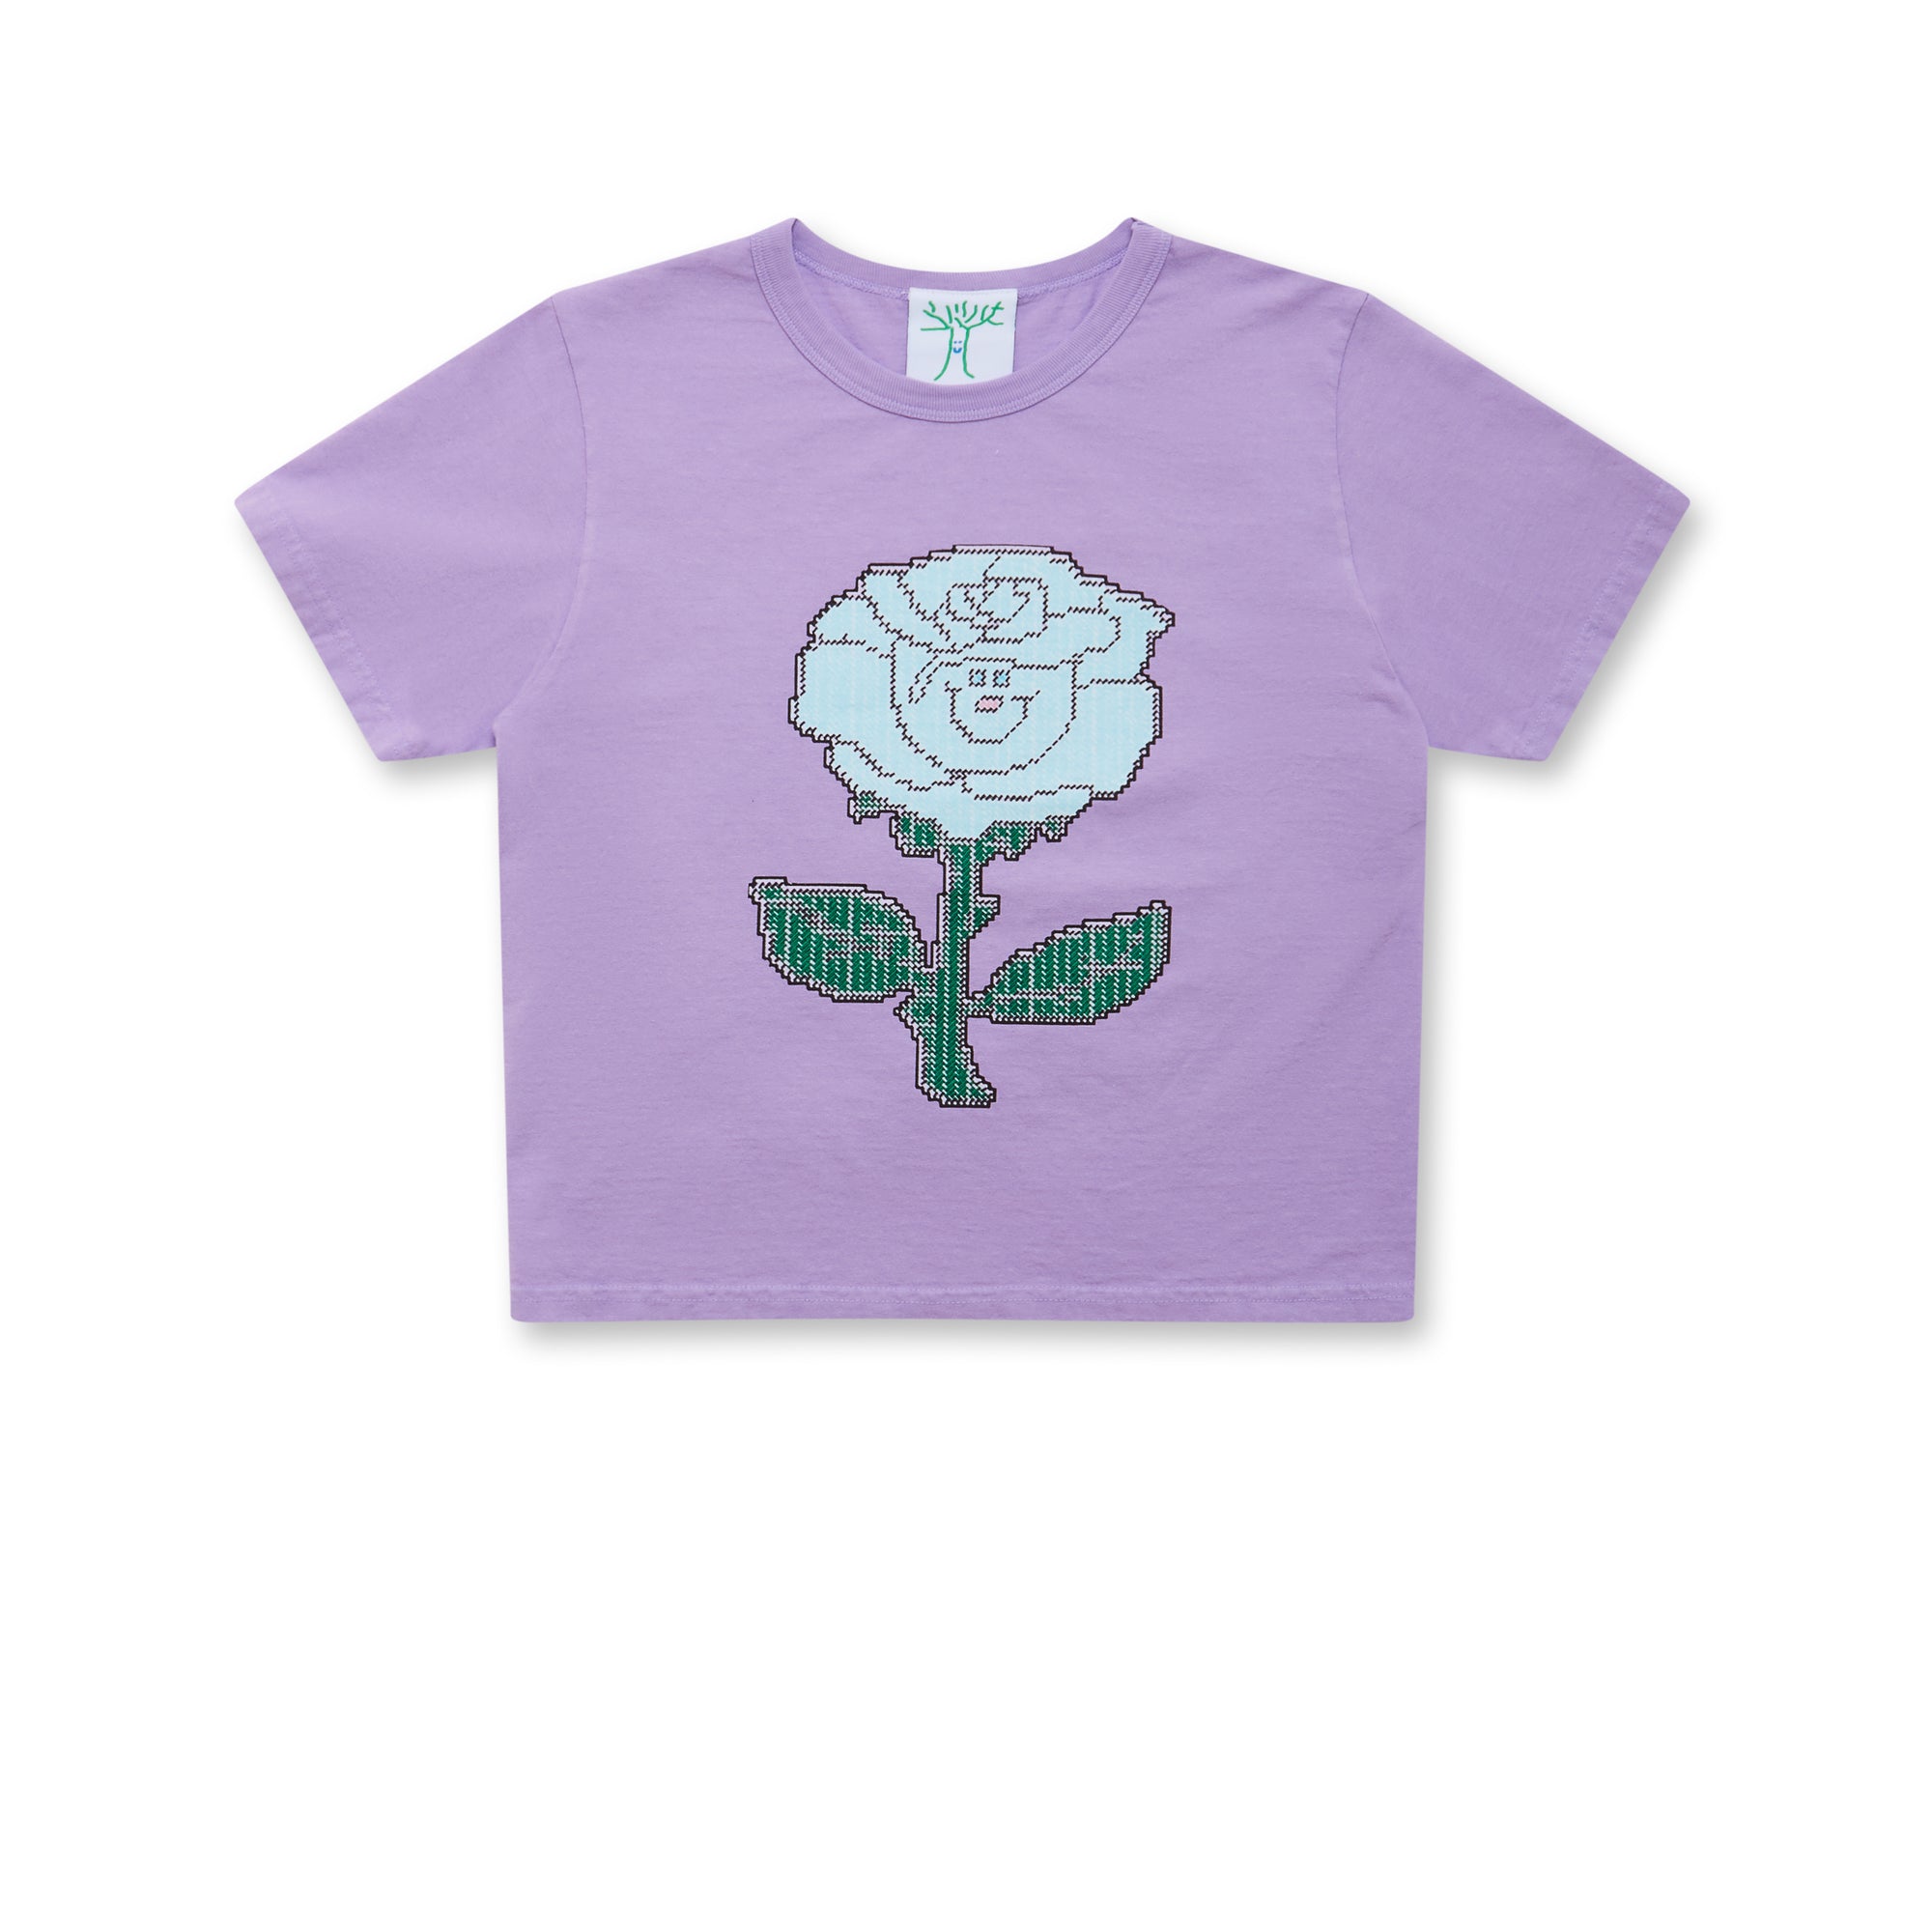 Online Ceramics - Blue Rose Smiley Baby Tee - (Lilac) view 1